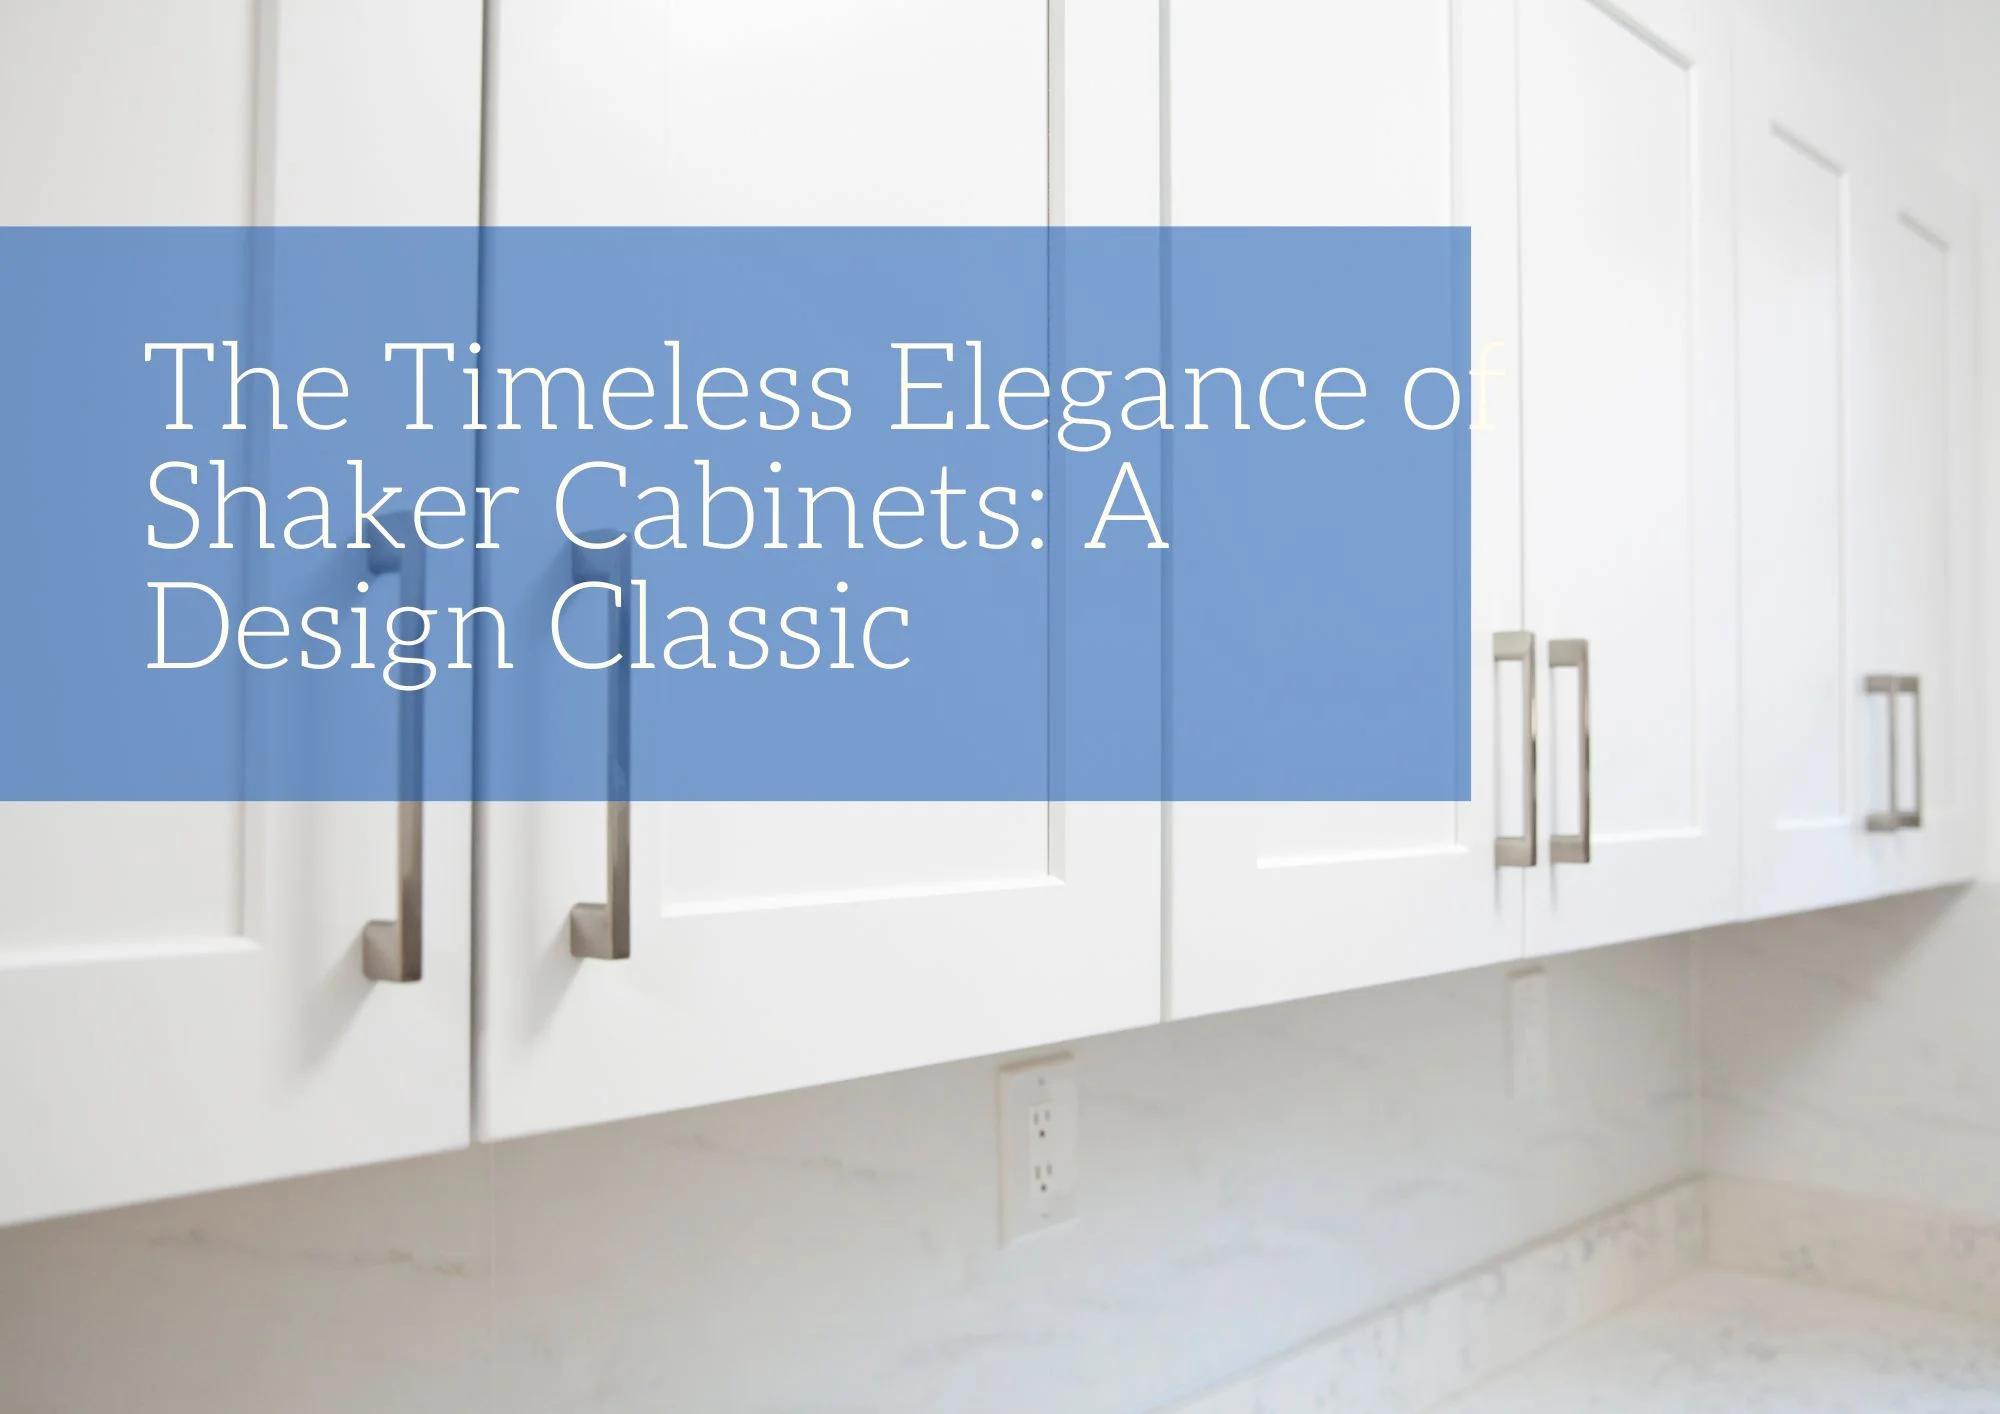 The Timeless Elegance of Shaker Cabinets: A Design Classic